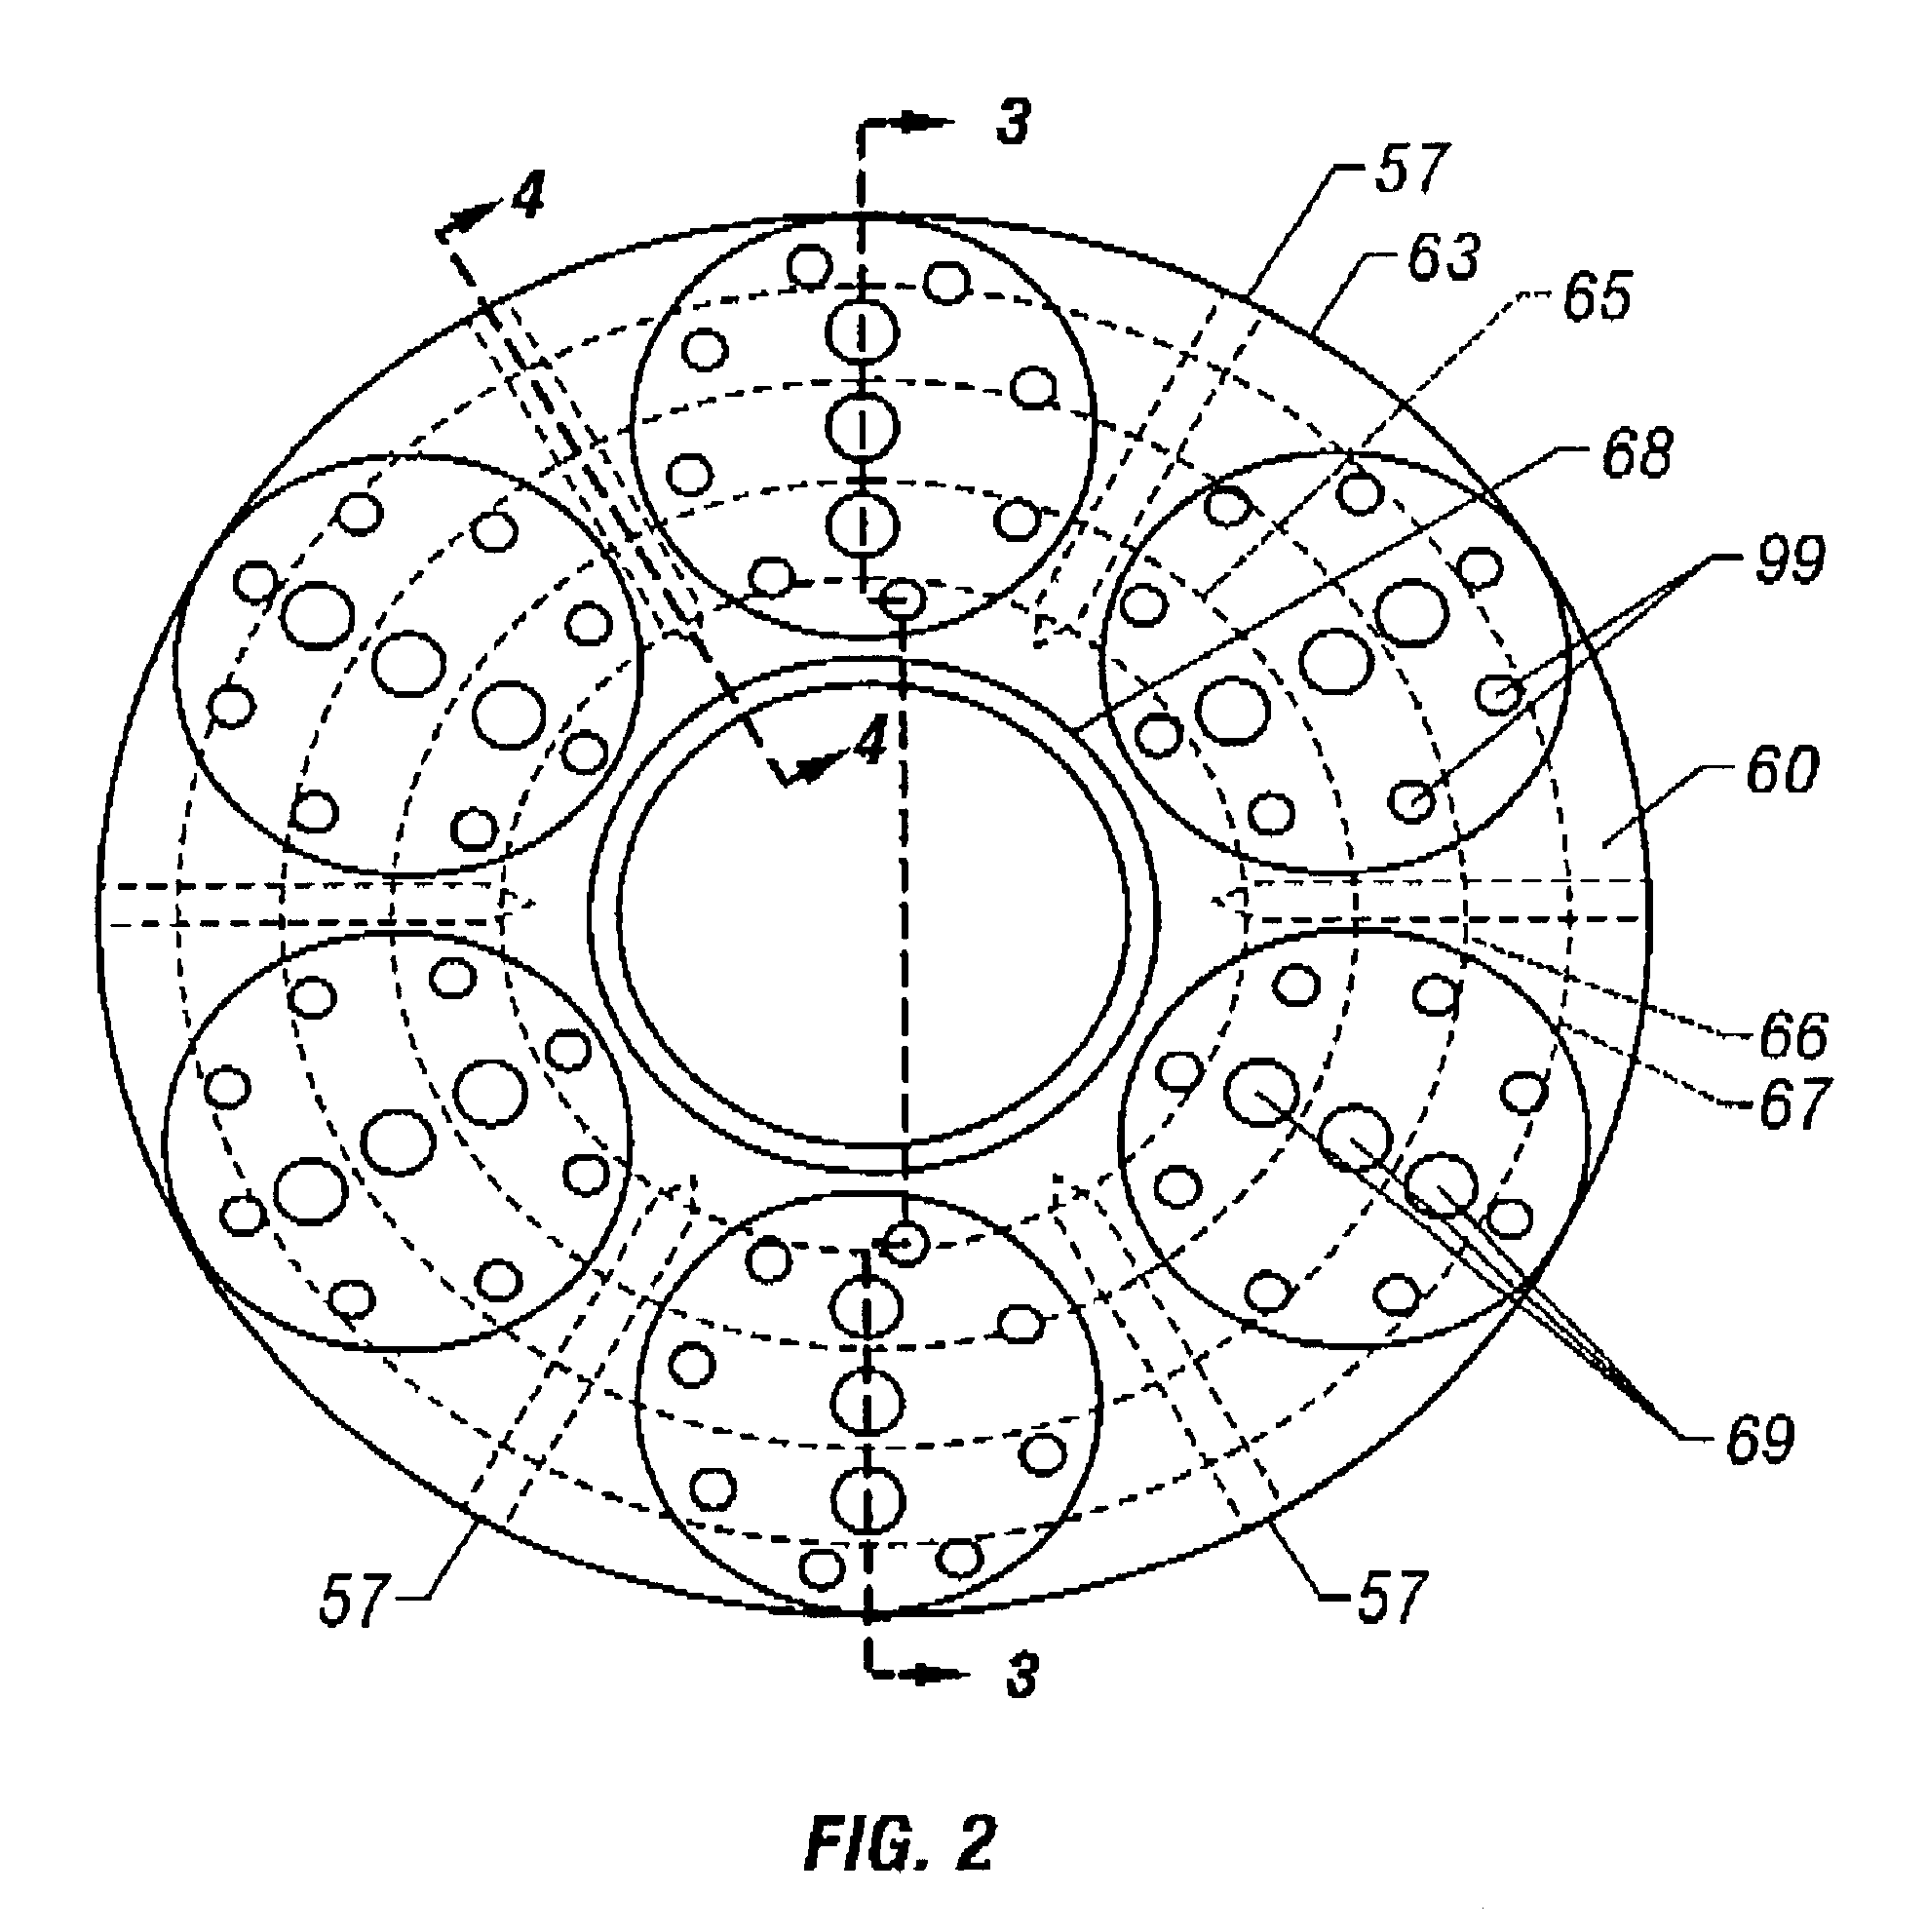 Co-linear tensioner and methods for assembling production and drilling risers using same